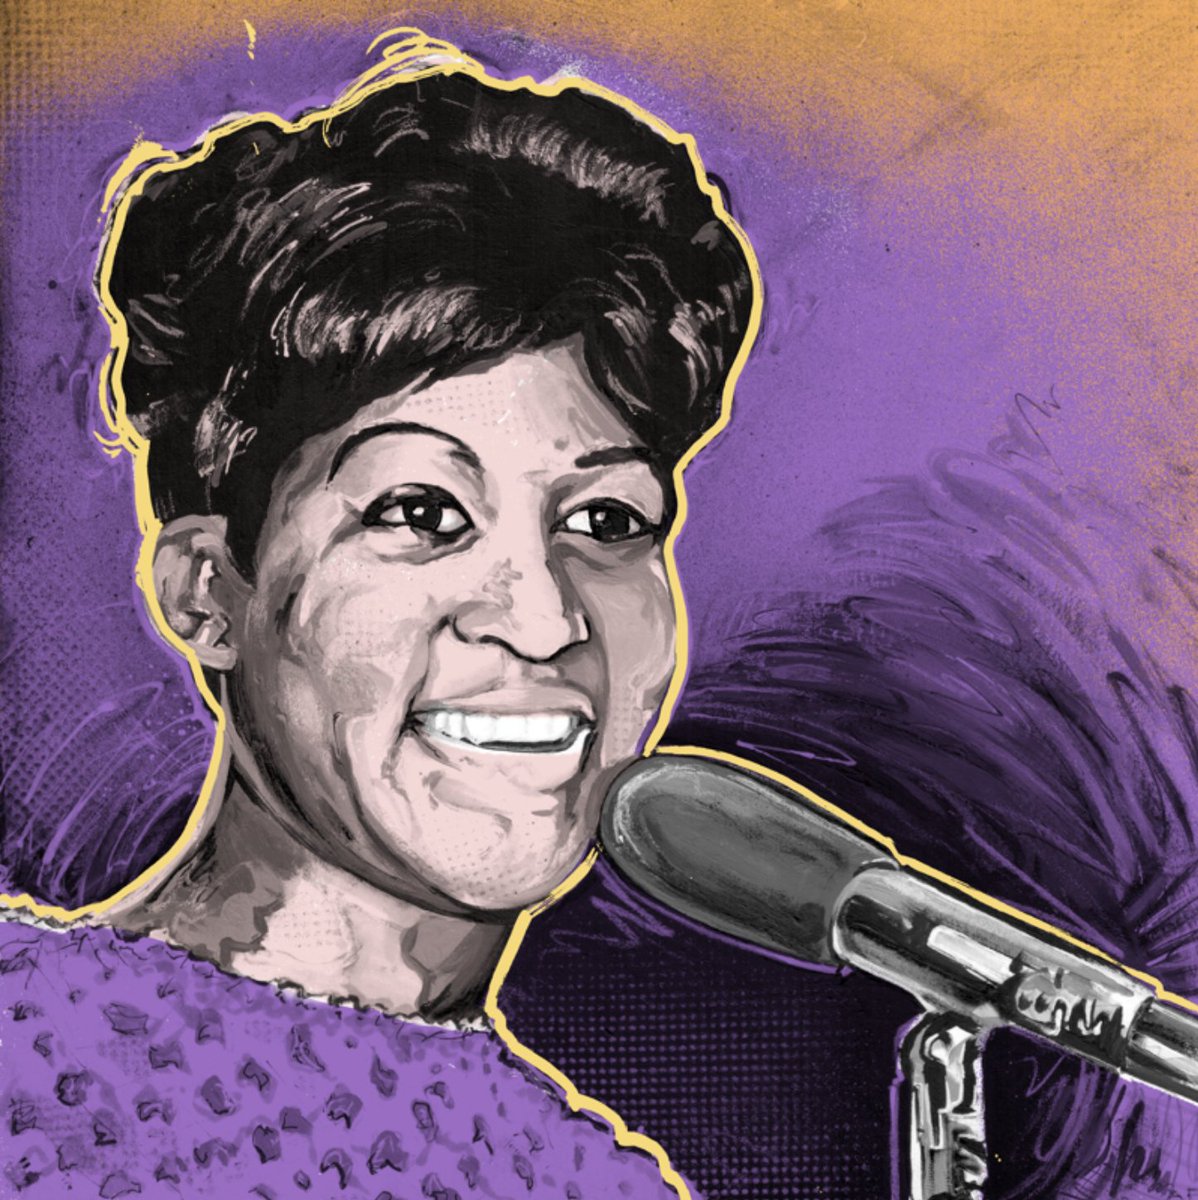 My newest #NFT is a collab between @1687Club and @withersgallery - inspired by a #vintagephoto from photojournalist #ErnestWithers of the Queen of Soul @ArethaFranklin #fundaiser #NFTsforgood